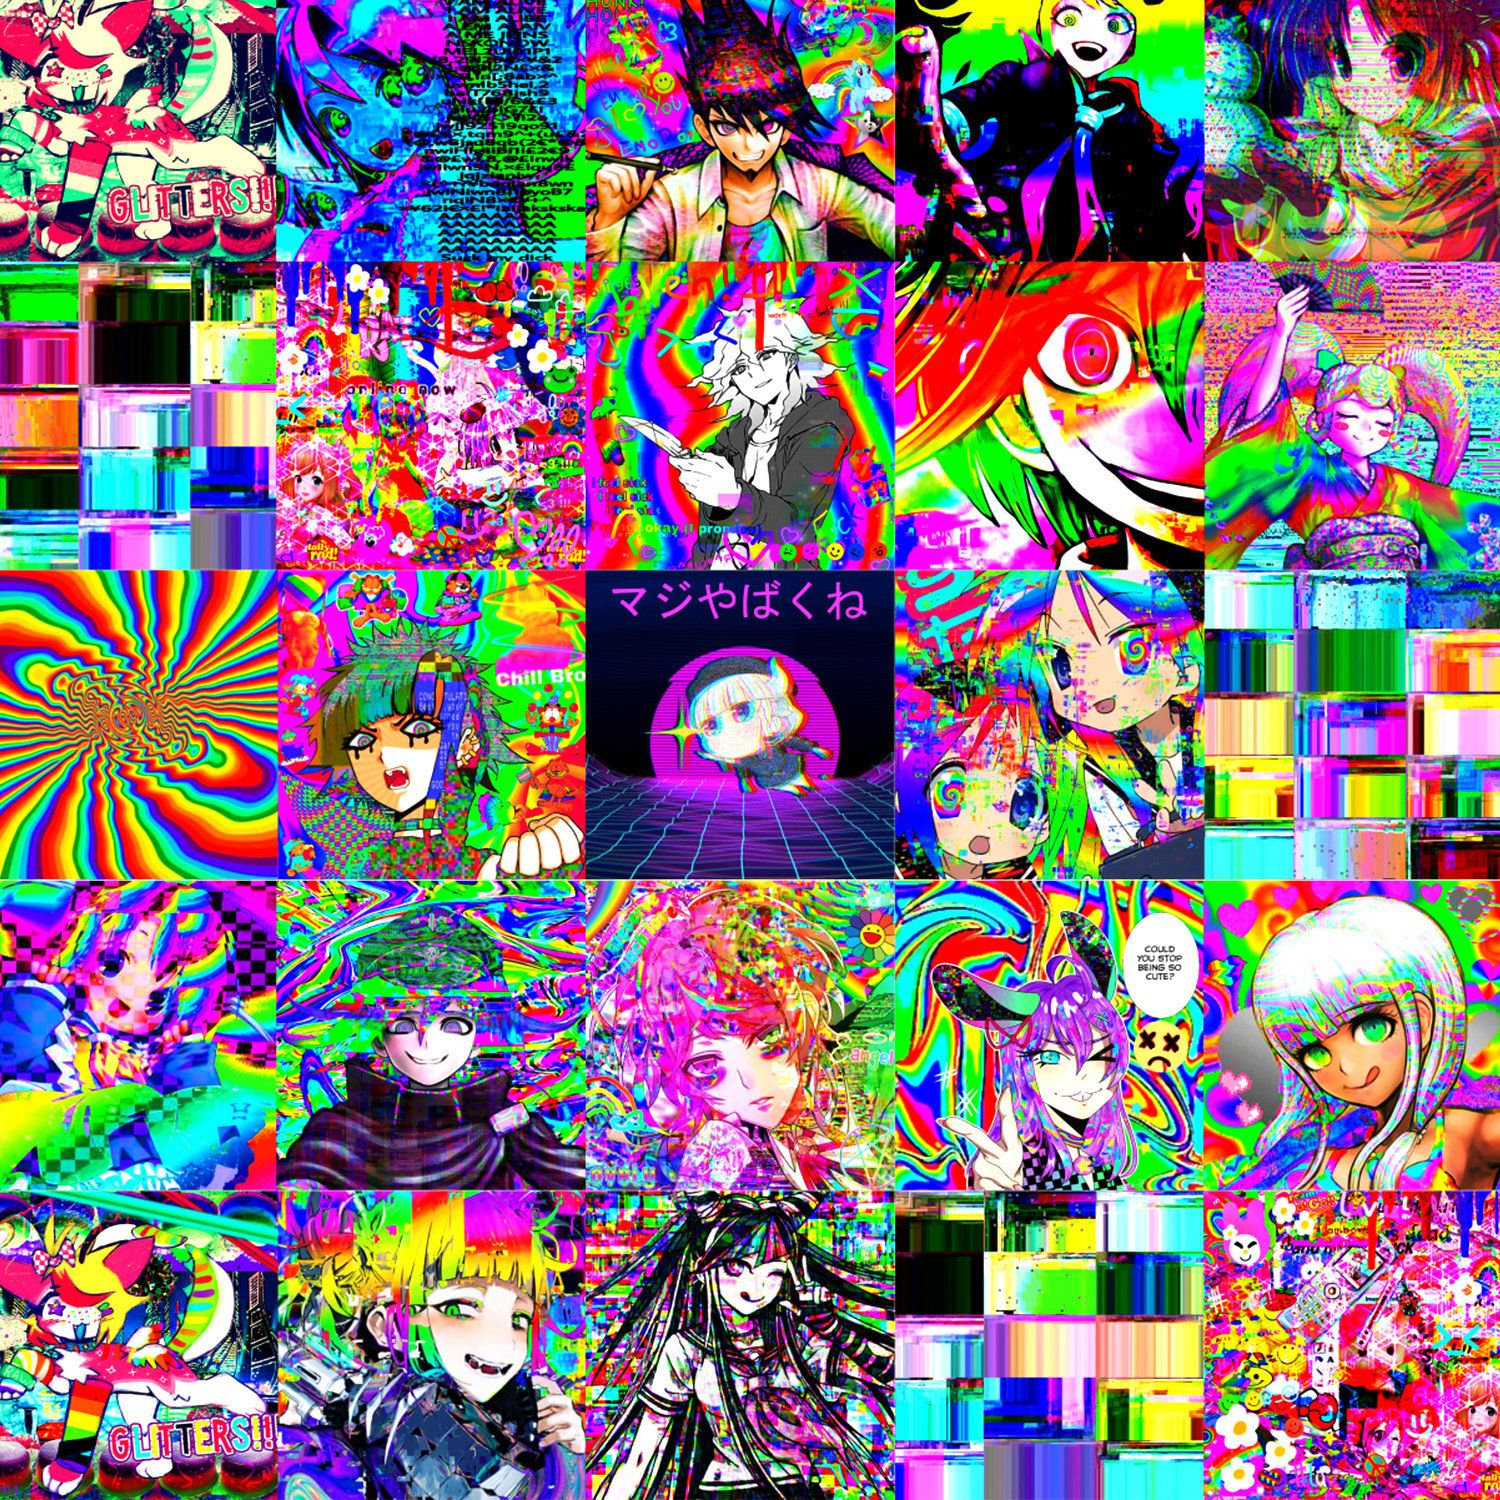 Aesthetic anime wallpaper with a variety of anime characters - Glitchcore